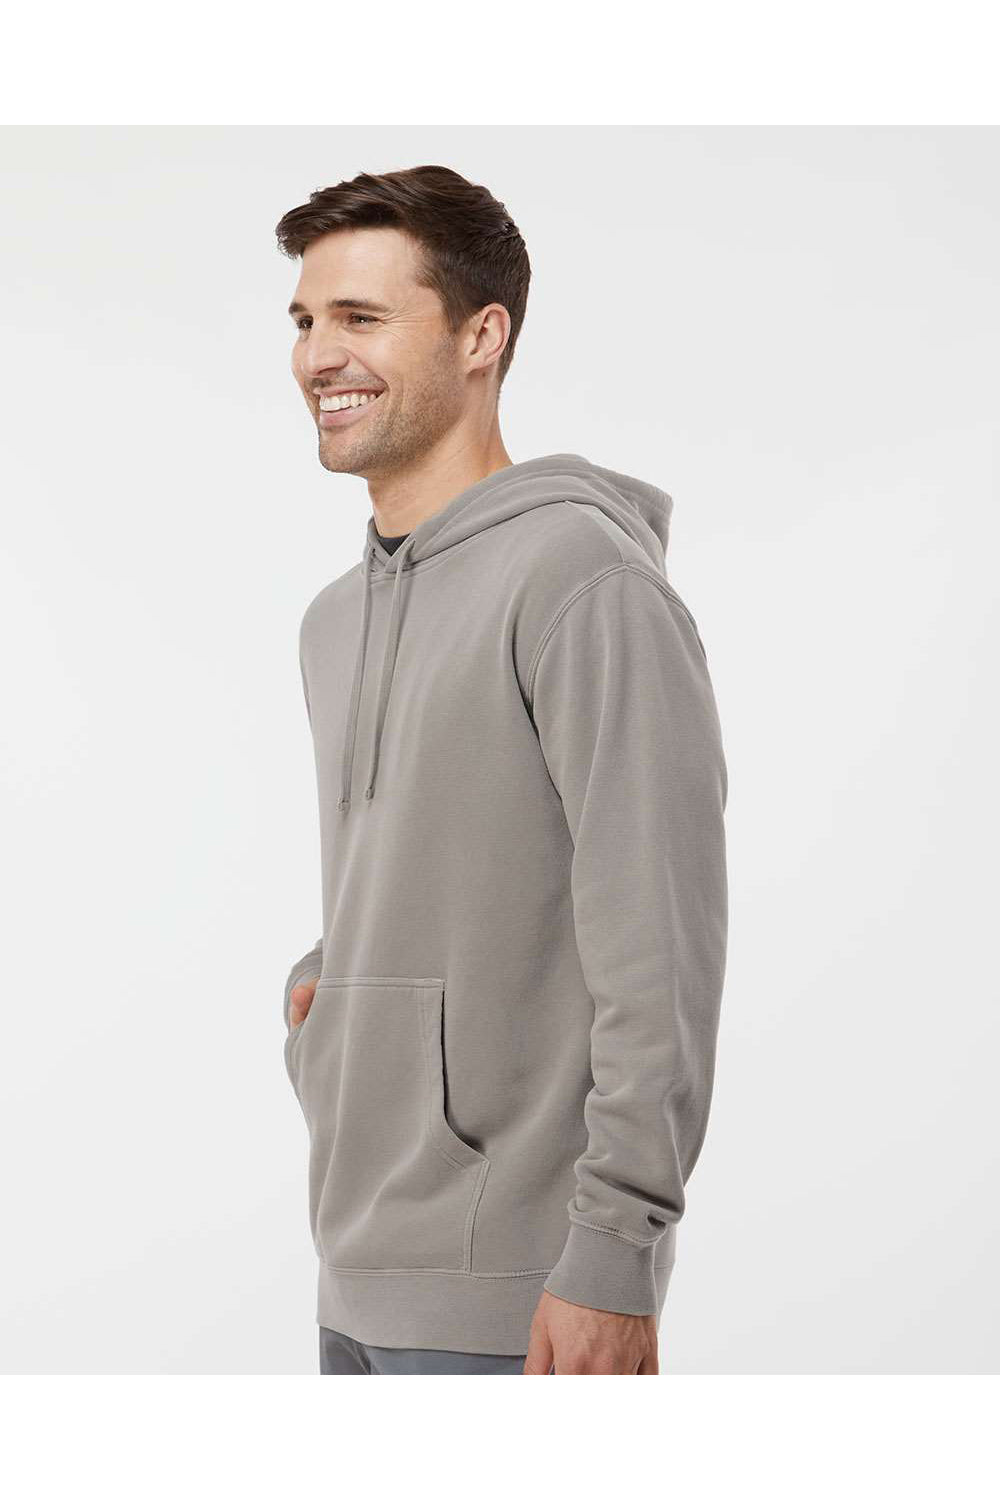 Independent Trading Co. PRM4500 Mens Pigment Dyed Hooded Sweatshirt Hoodie Cement Grey Model Side